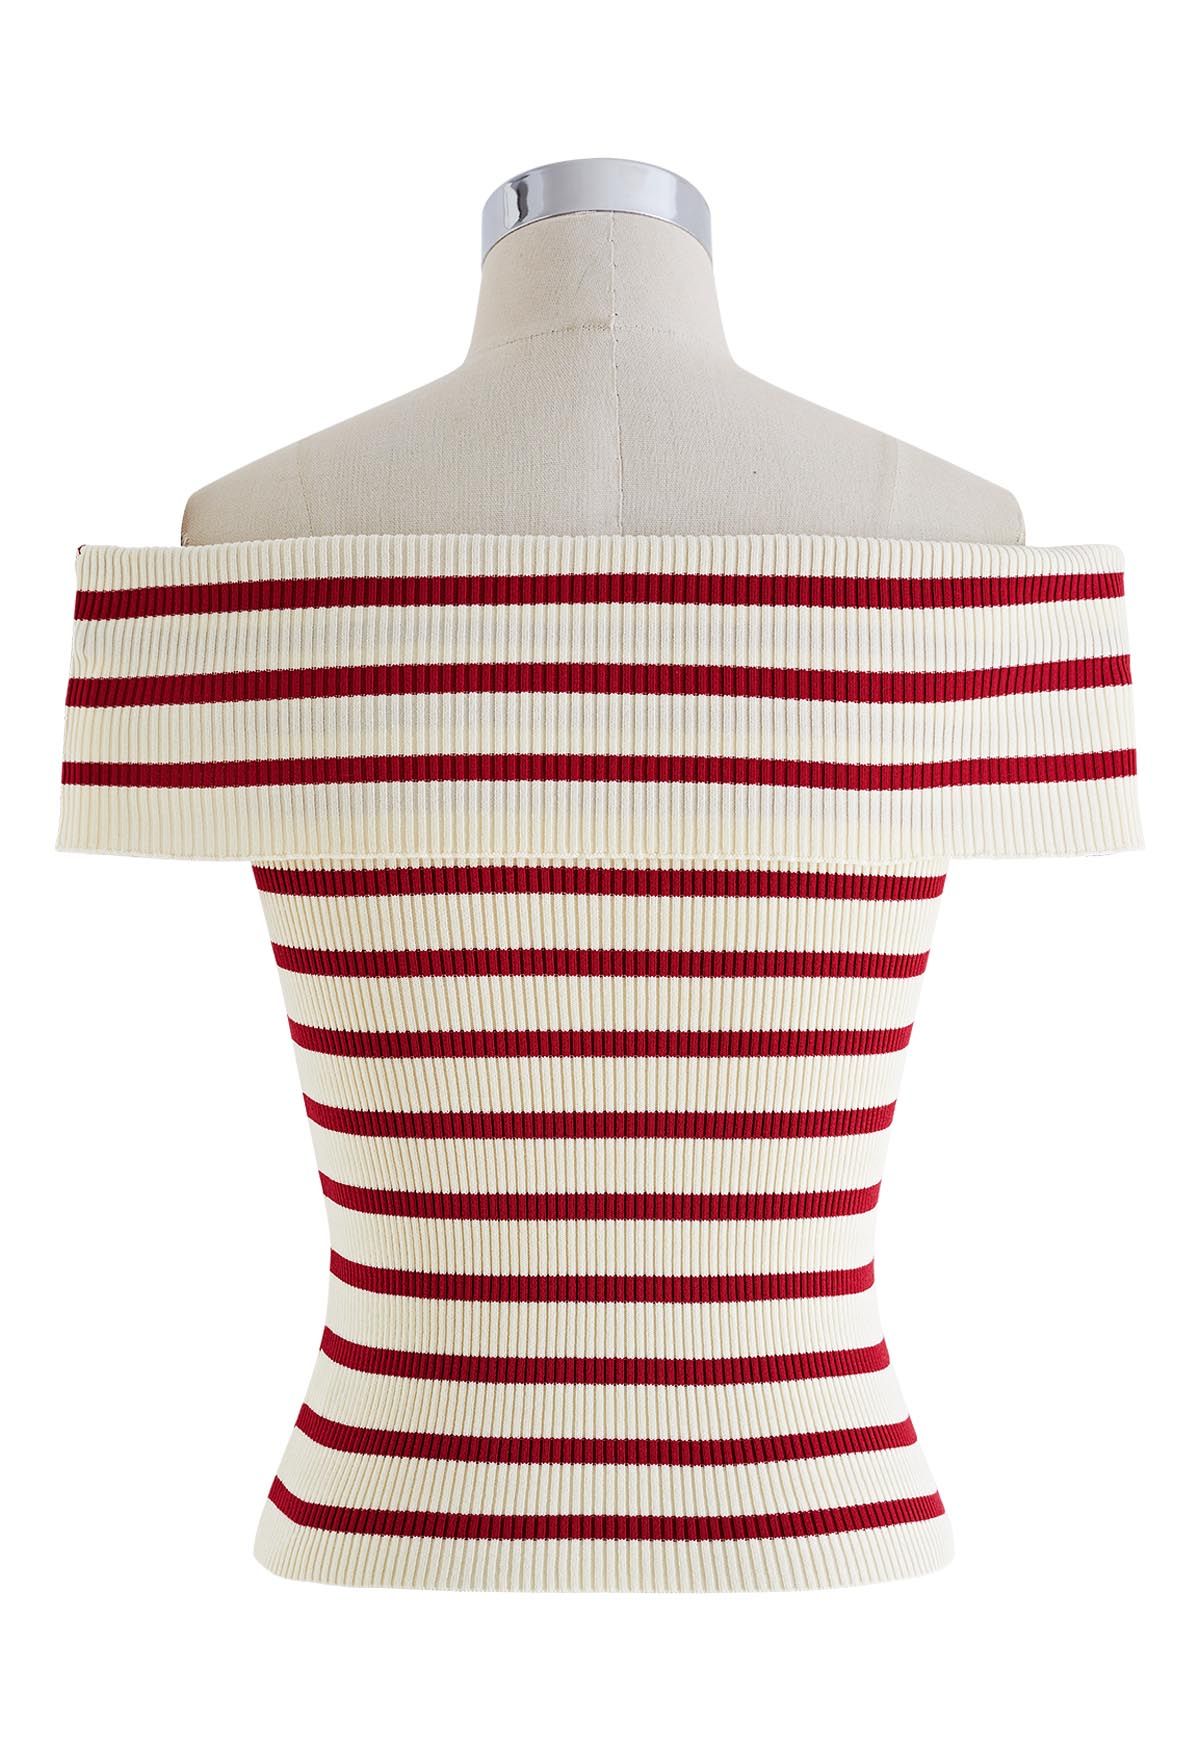 Folded Off-Shoulder Rib Knit Top in Red Stripe - Retro, Indie and 